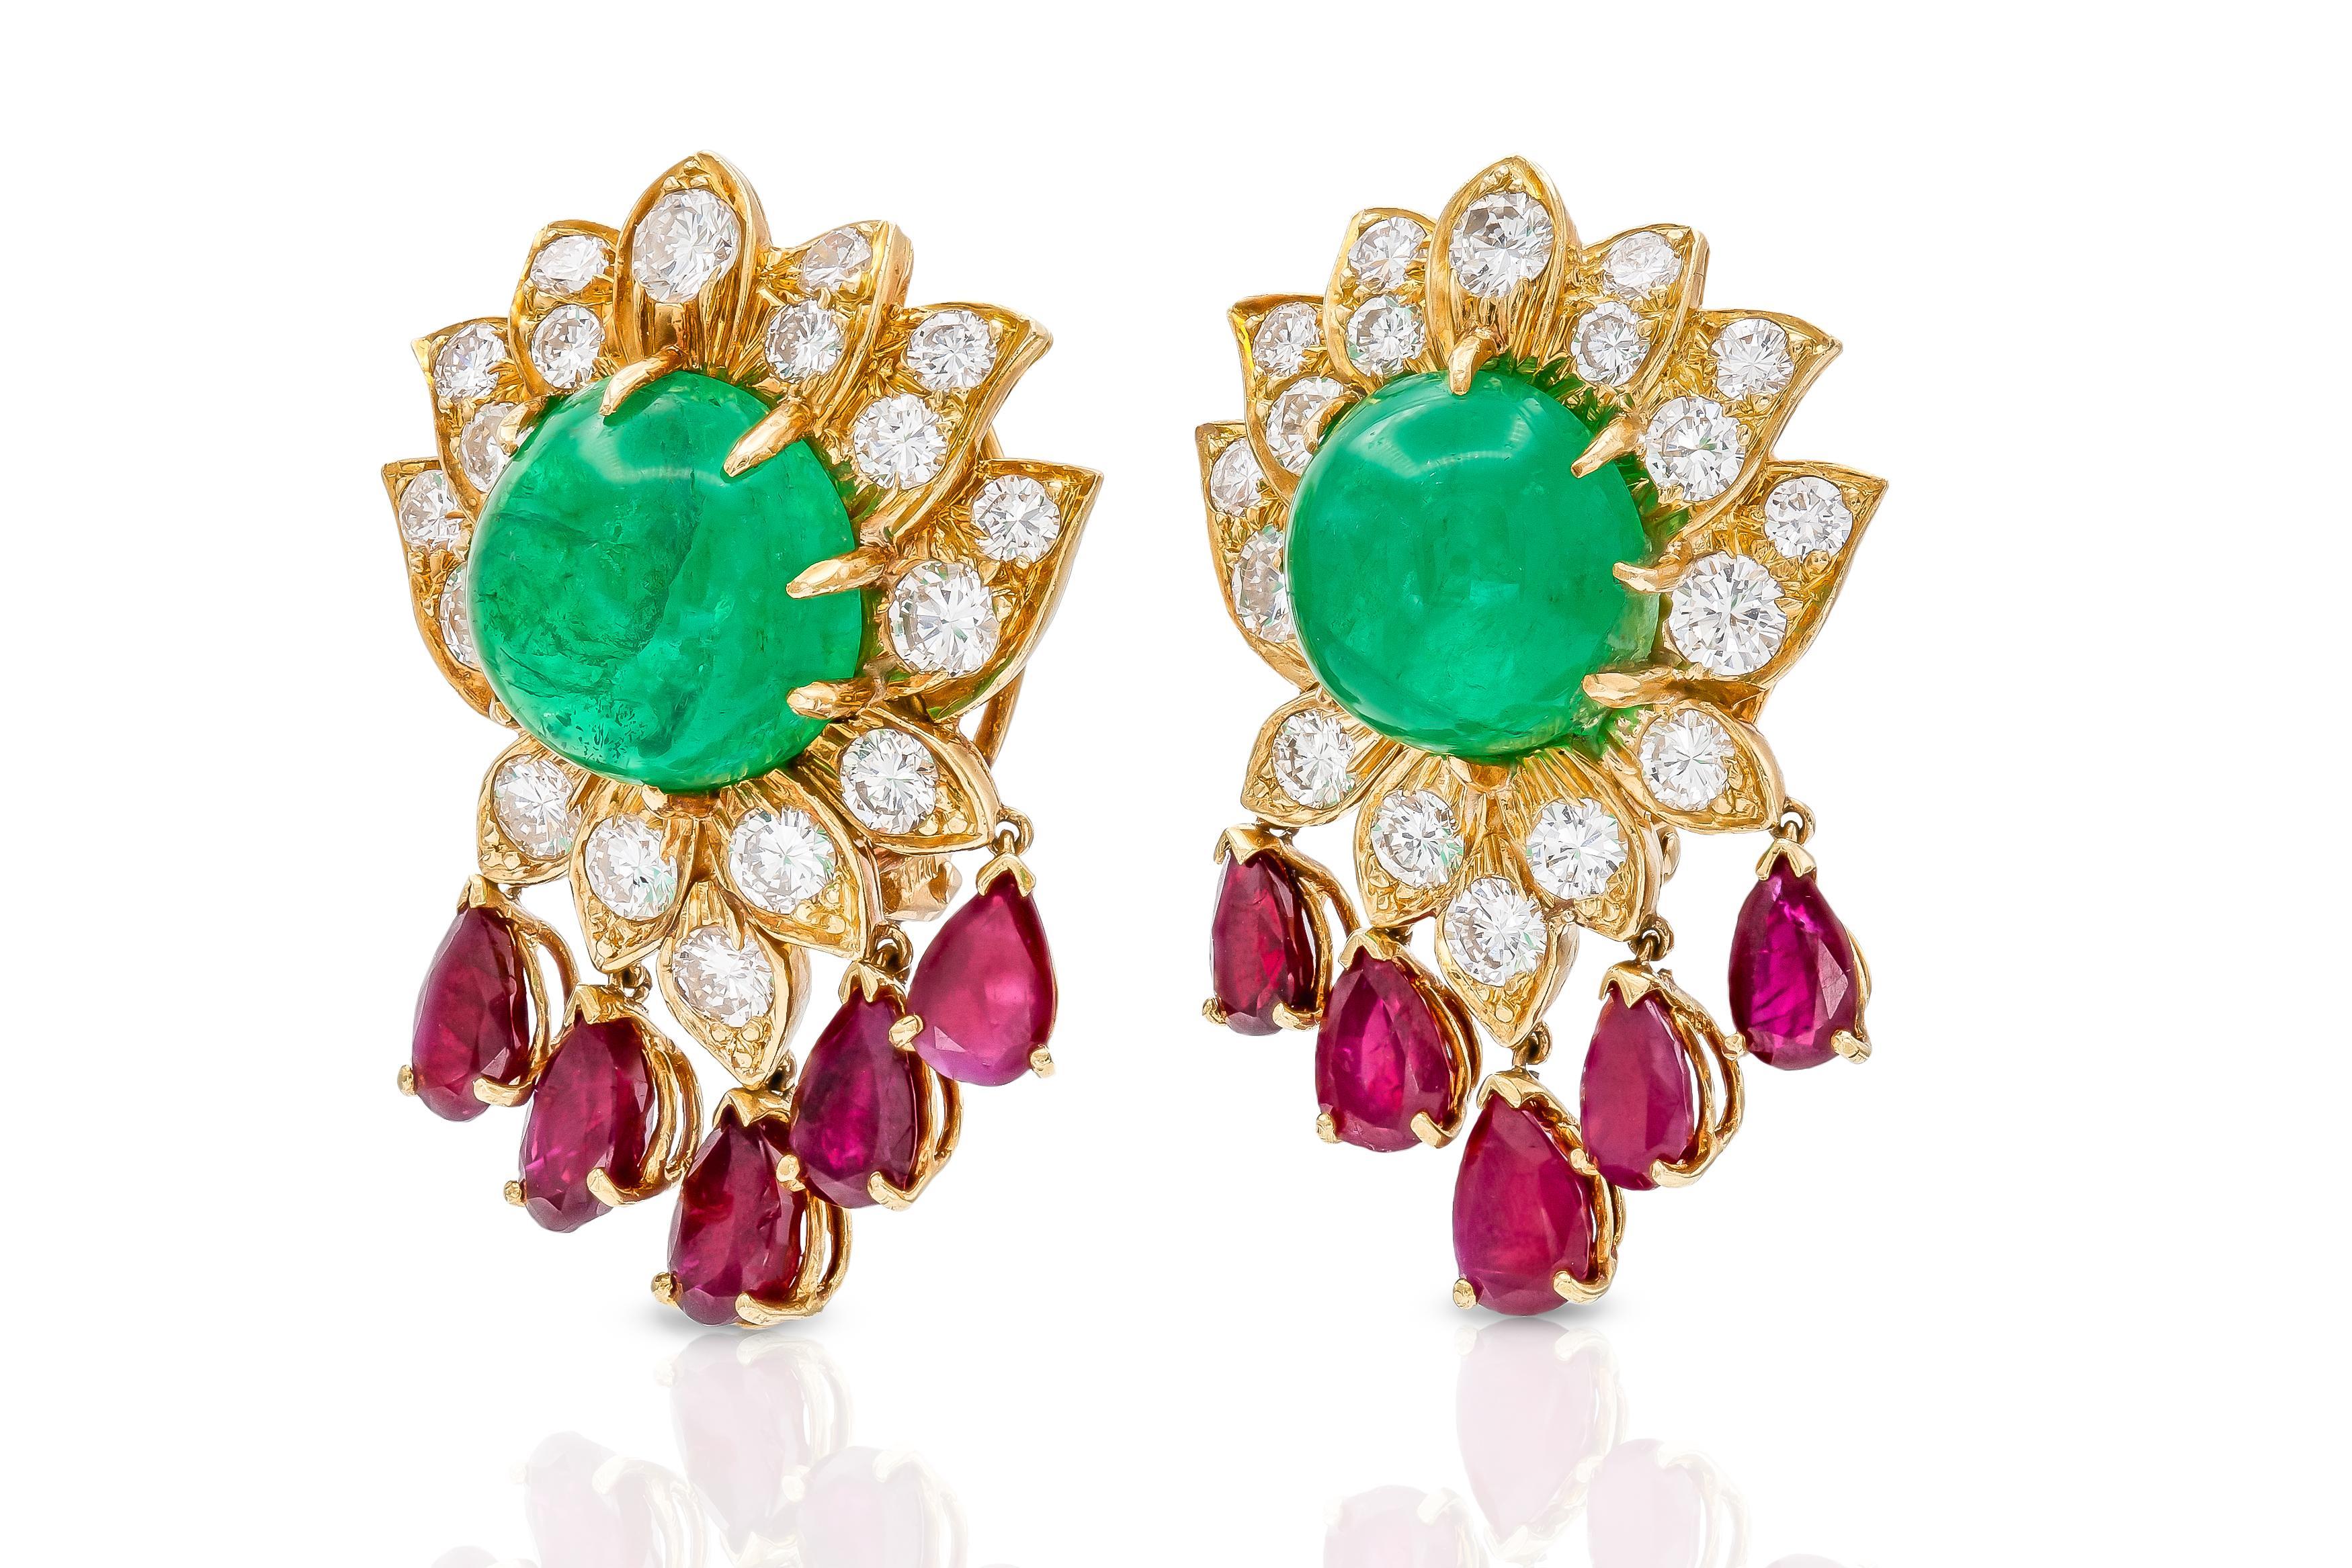 Finely crafted in 18k yellow gold with two Cabochon Emeralds weighing approximately a total of 12.00 carats, 10 Pear-Shaped Rubies weighing approximately a total of 3.00 carats, and Round Brilliant cut Diamonds weighing approximately a total of 5.50